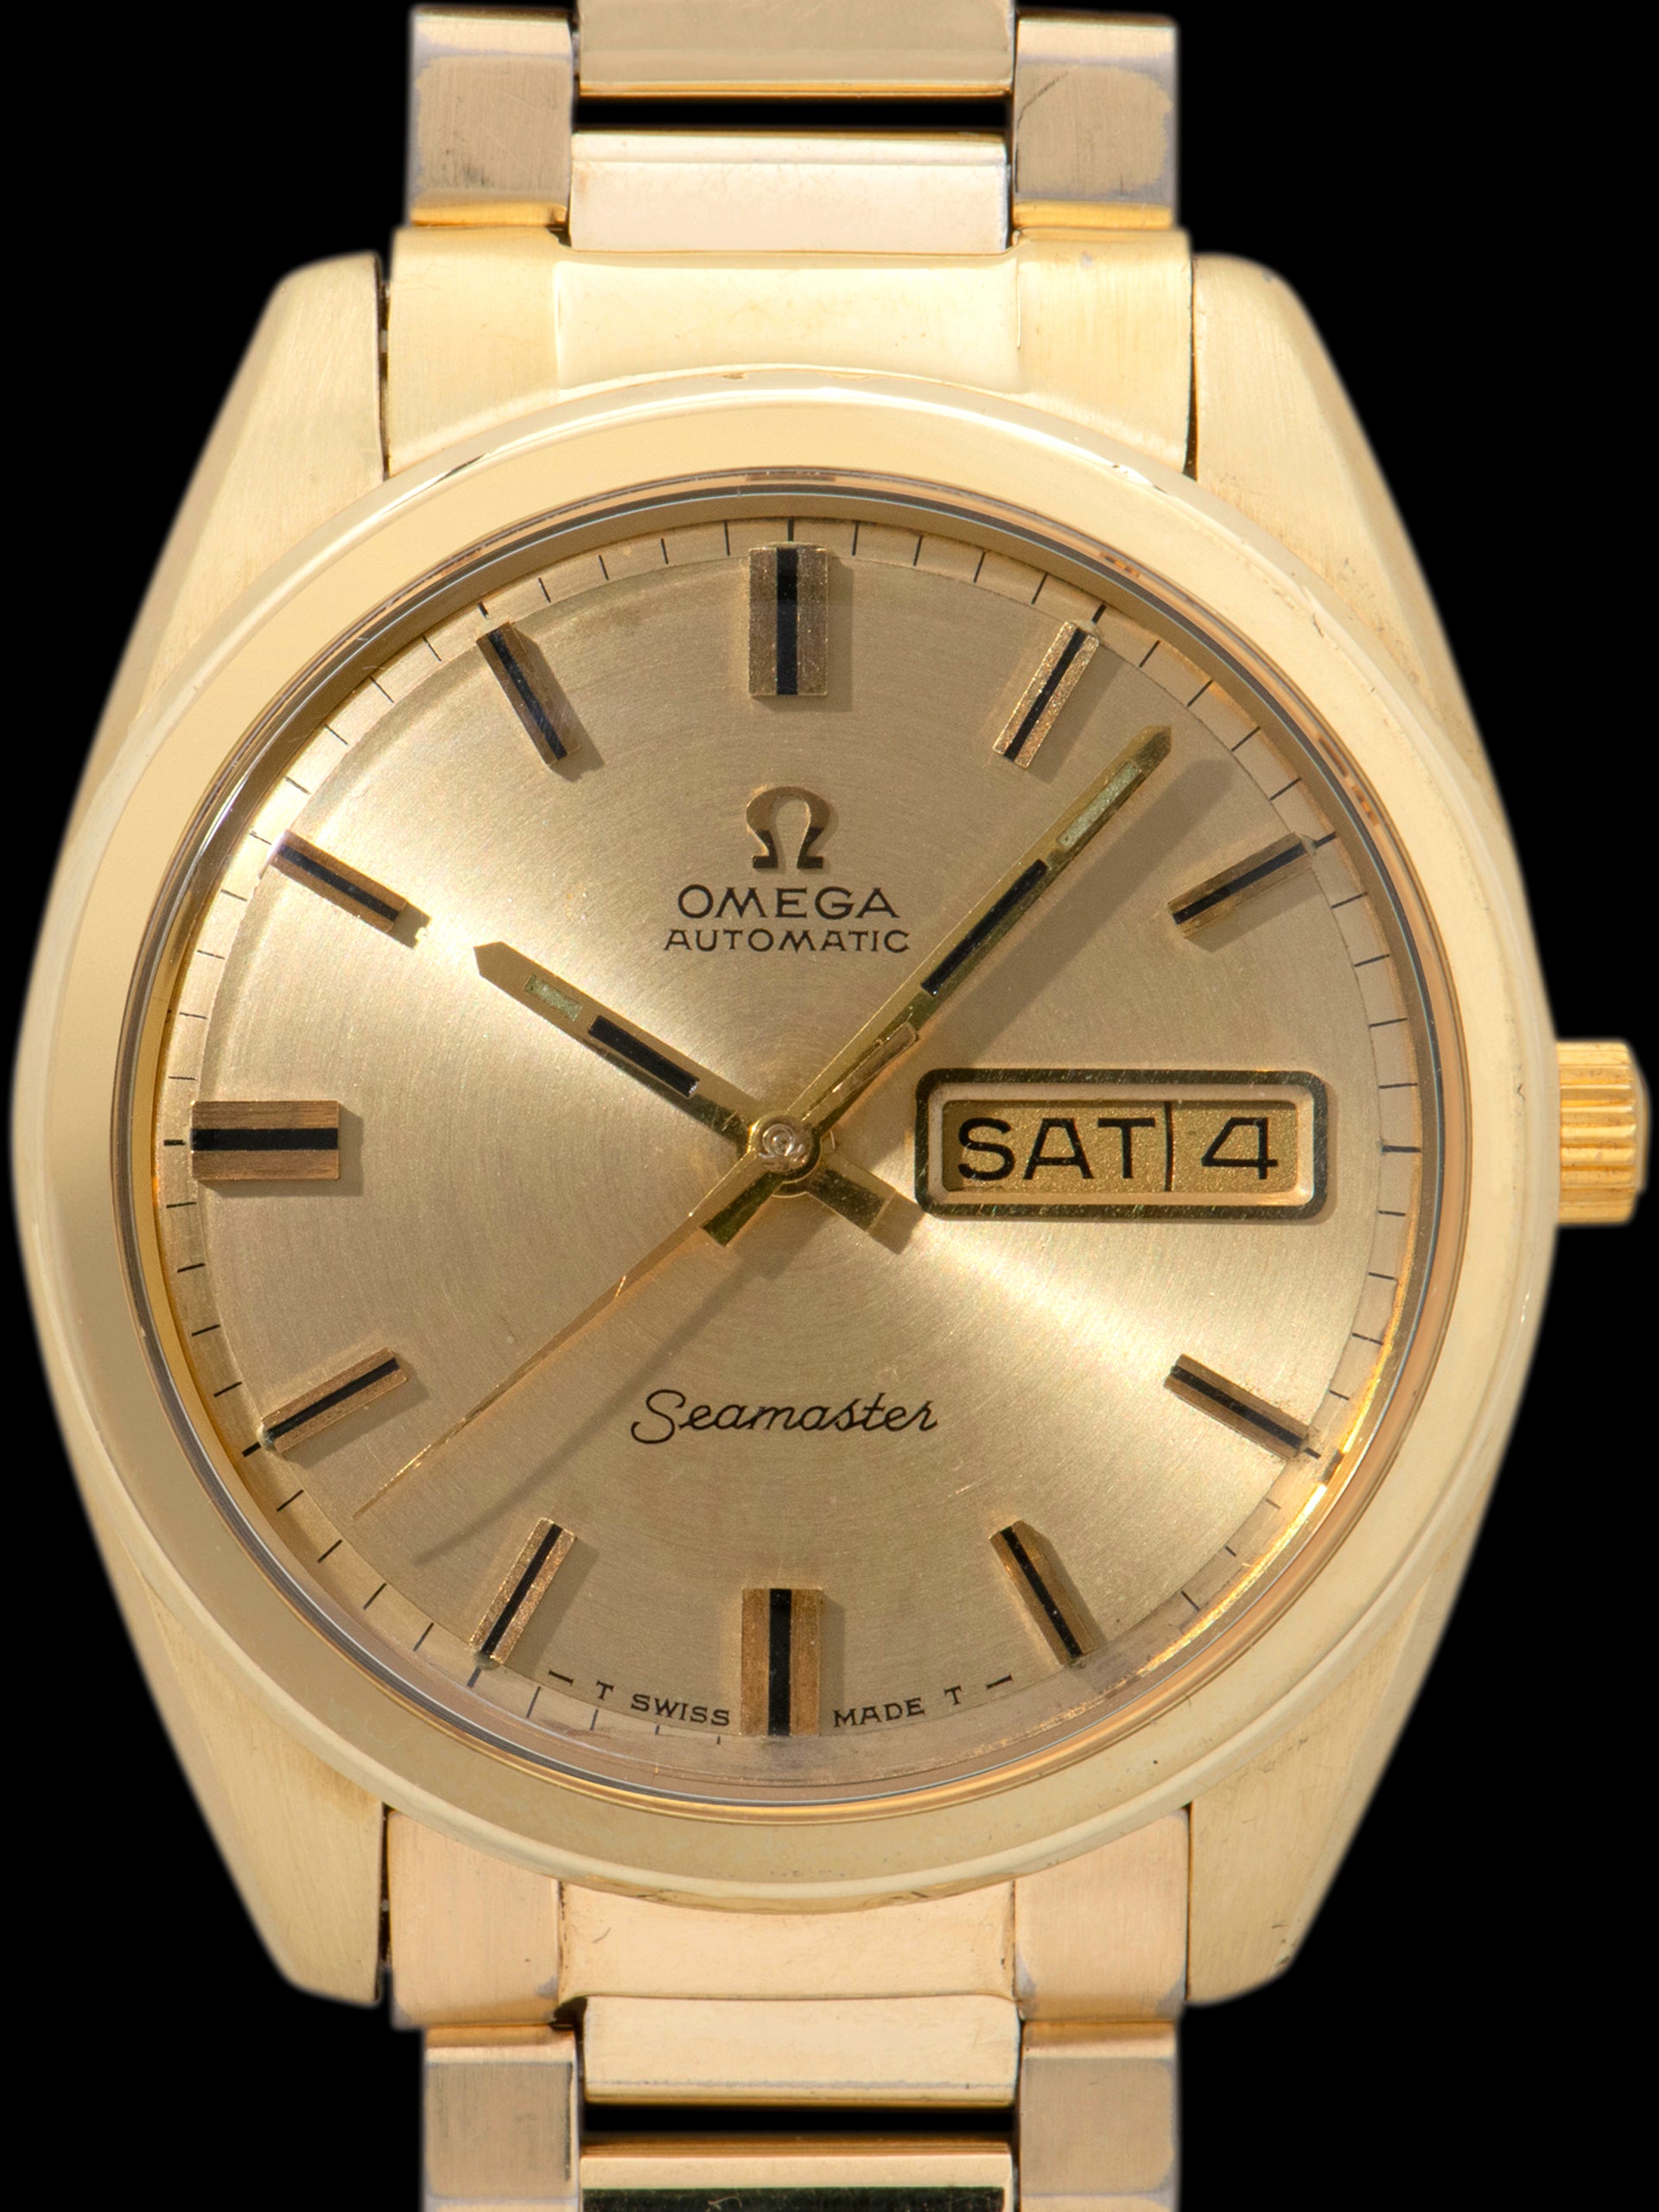 1968 Omega Seamaster Automatic (Ref. 166.0032) "Gold Filled" Cal. 752